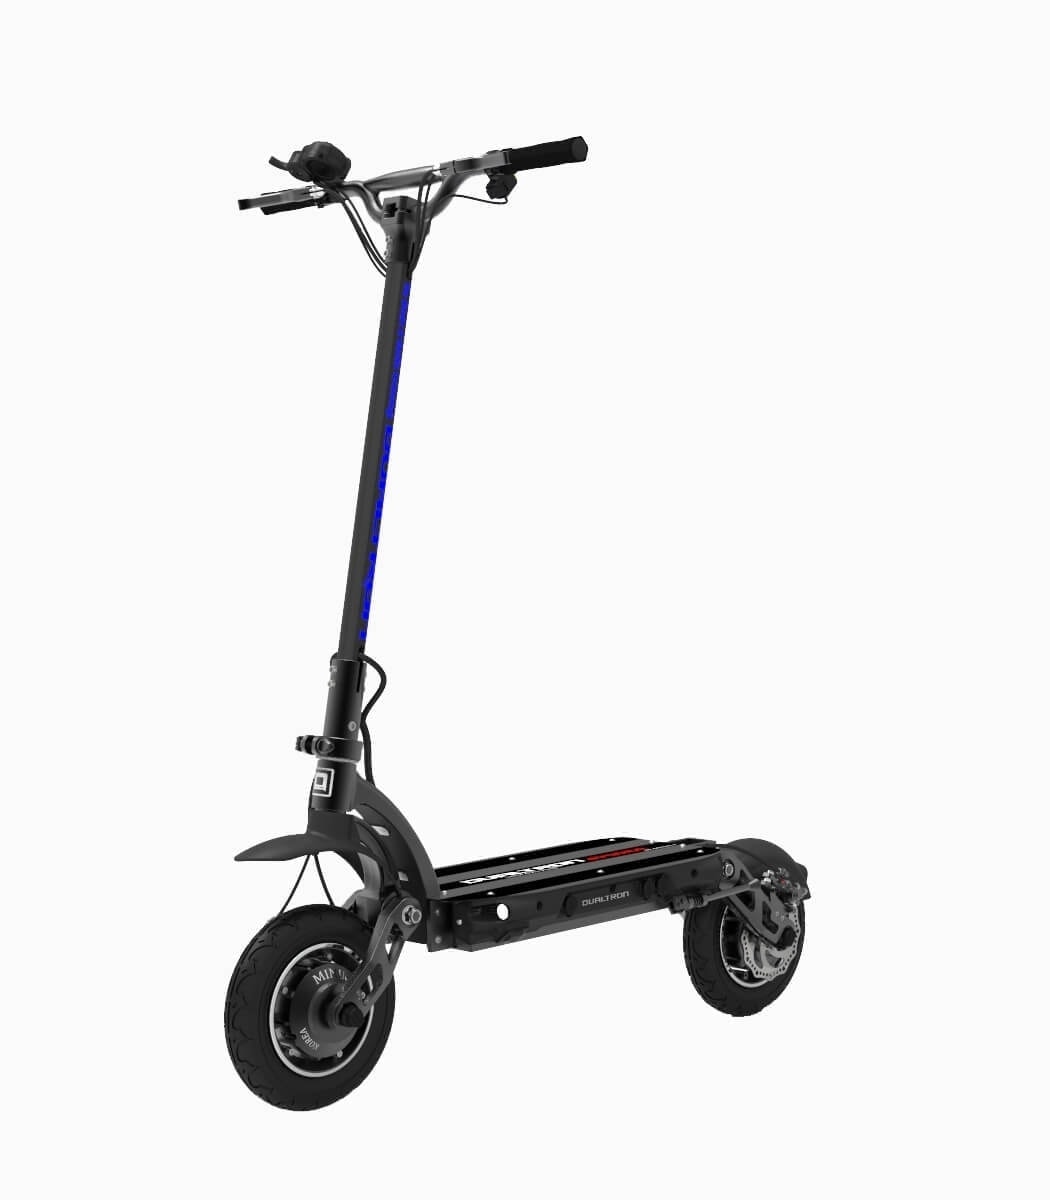 DUALTRON SPIDER (BLACK17.5AH) UL2272 certified high performance e-scooter angled left